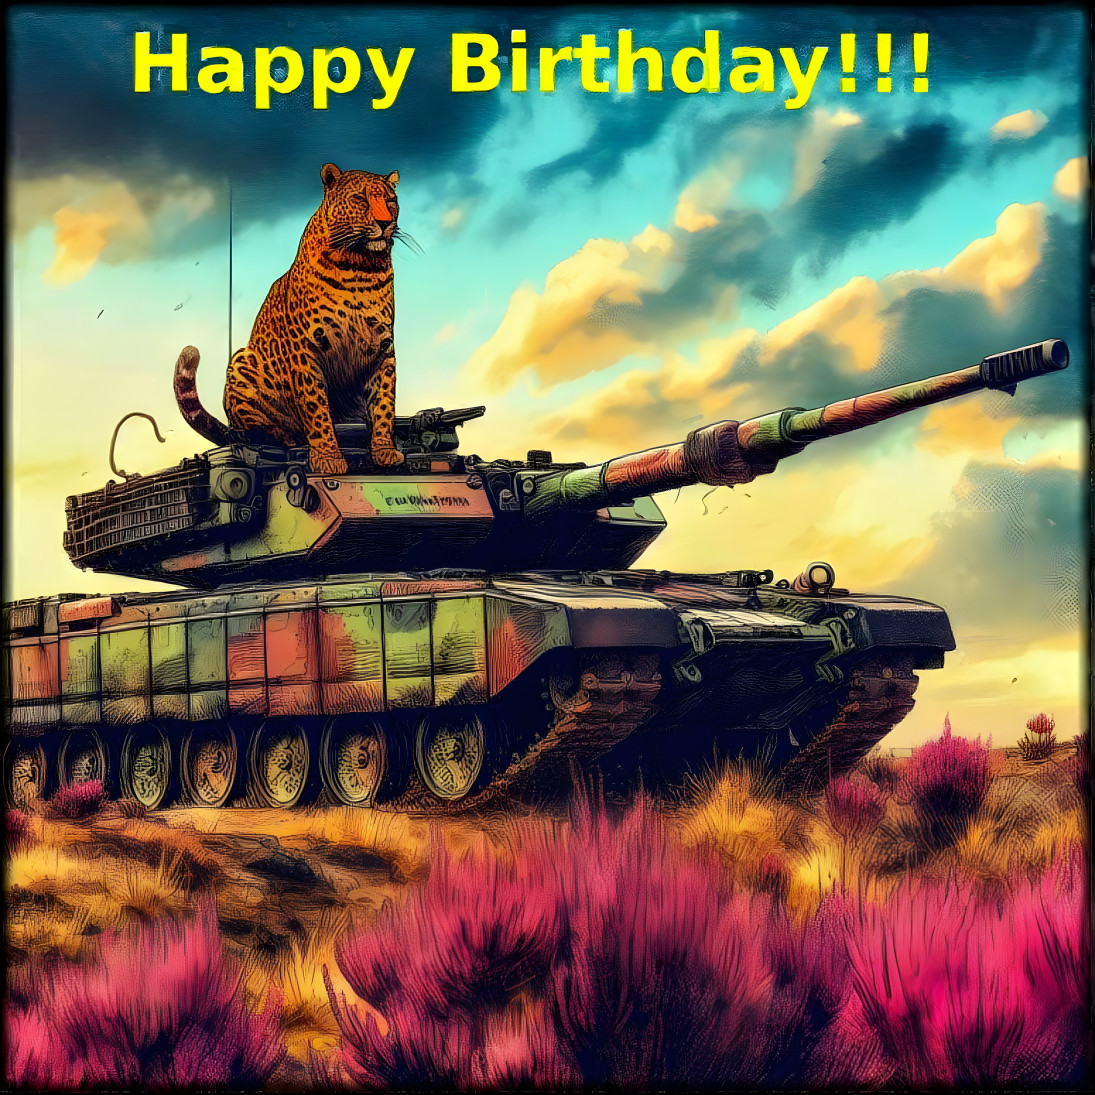 A Leopard on a Leopard 2A7 - Happy Birthday!